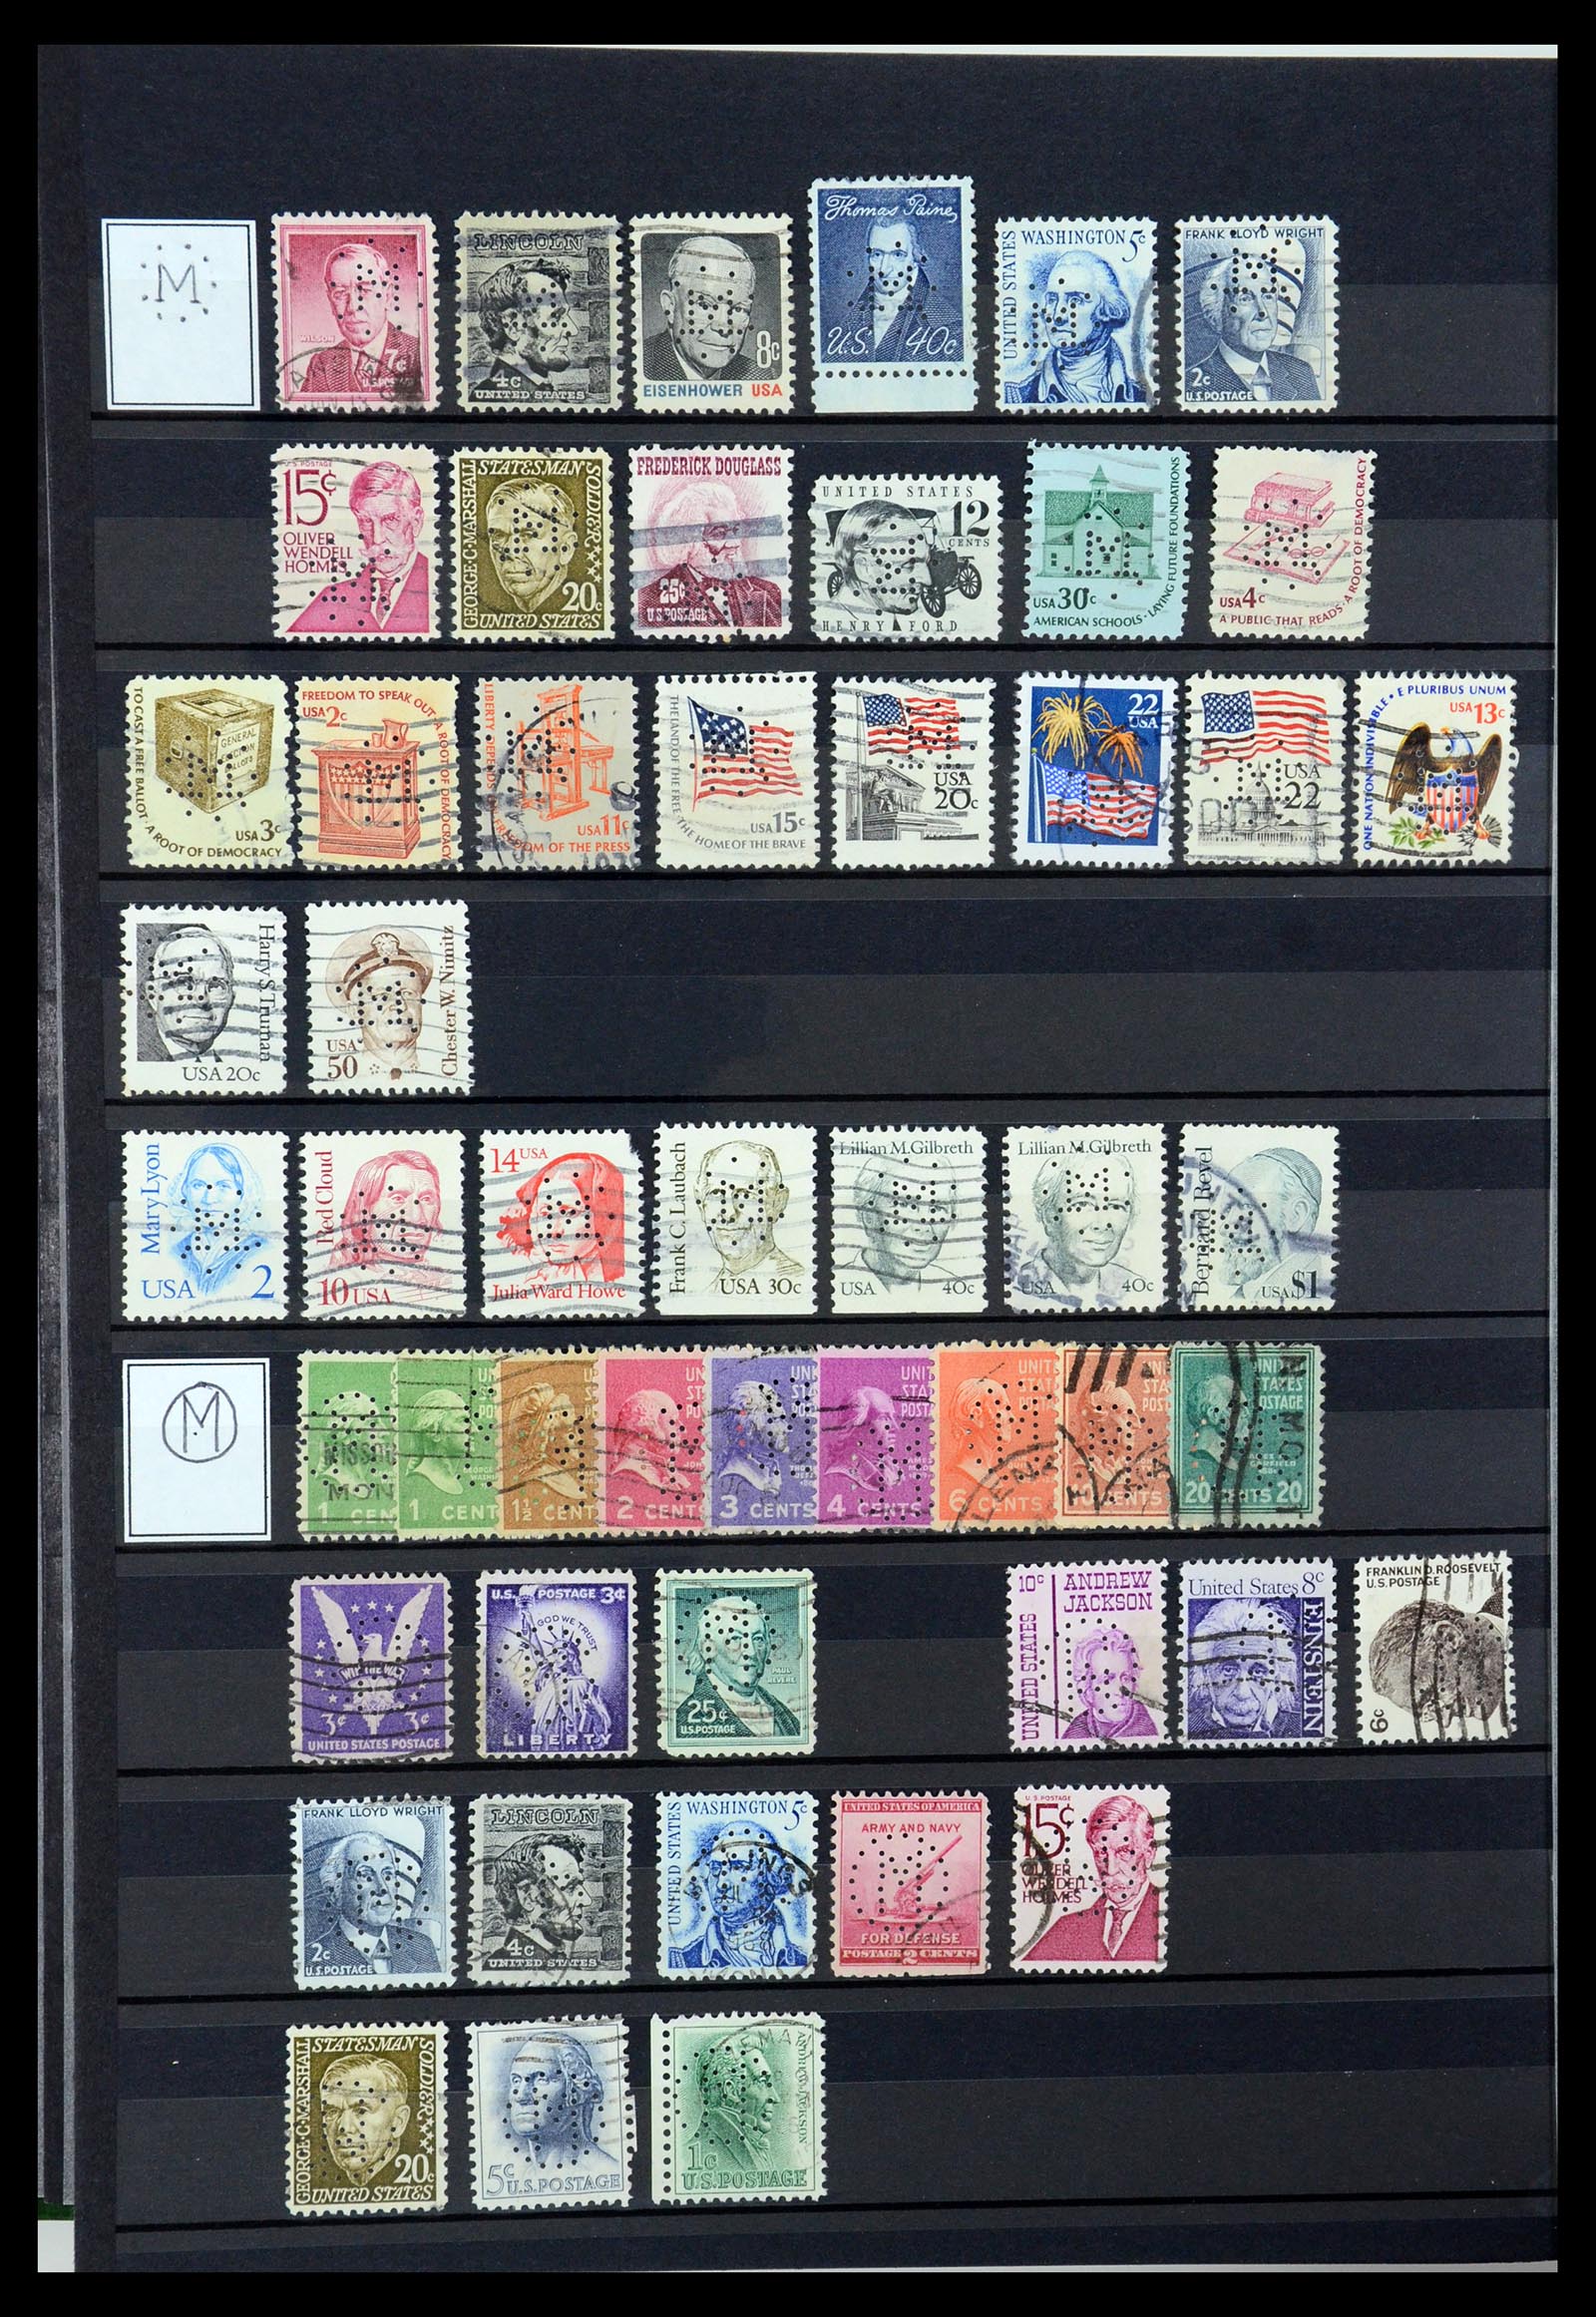 36388 084 - Stamp collection 36388 USA perfins.